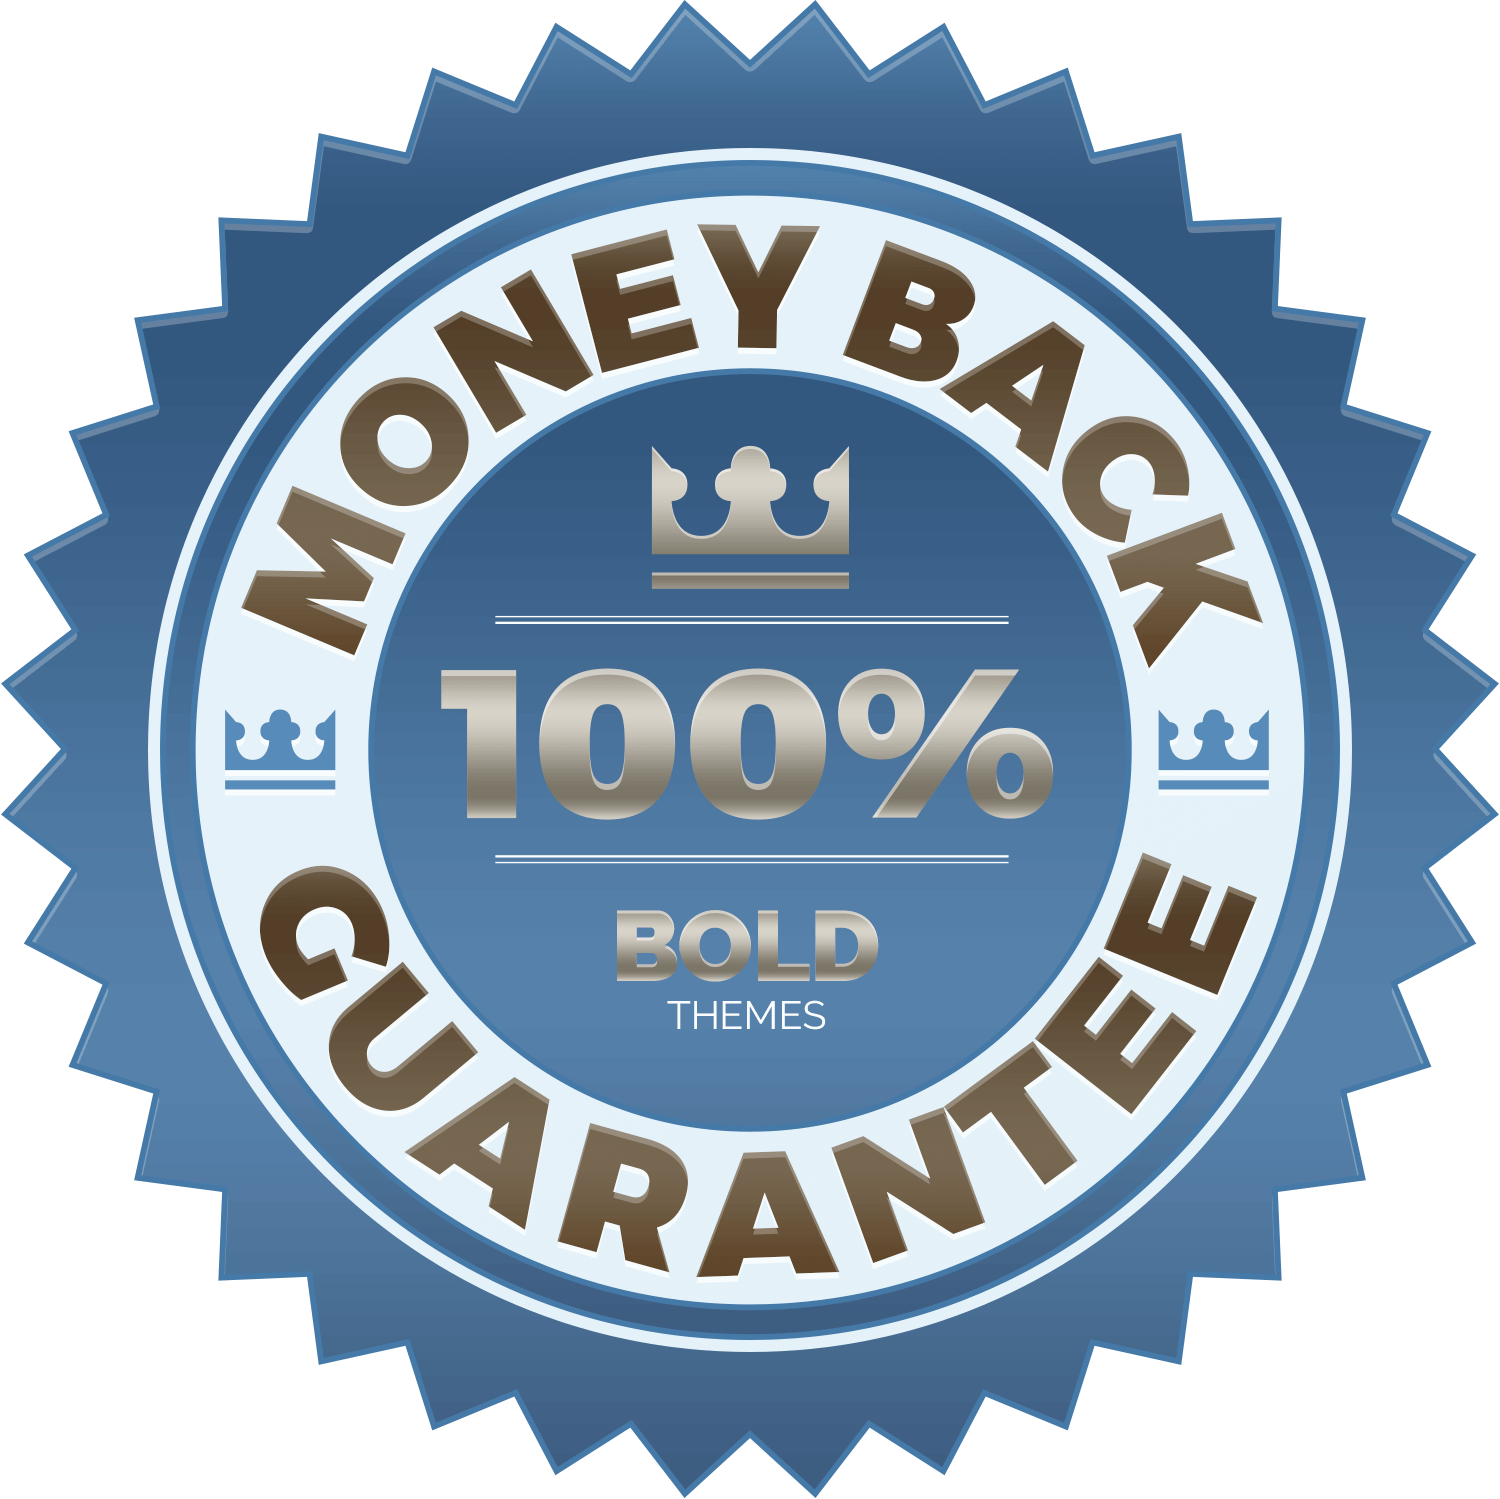 http://www.treelogy.it/wp-content/uploads/2017/05/Money-back-guarantee.png